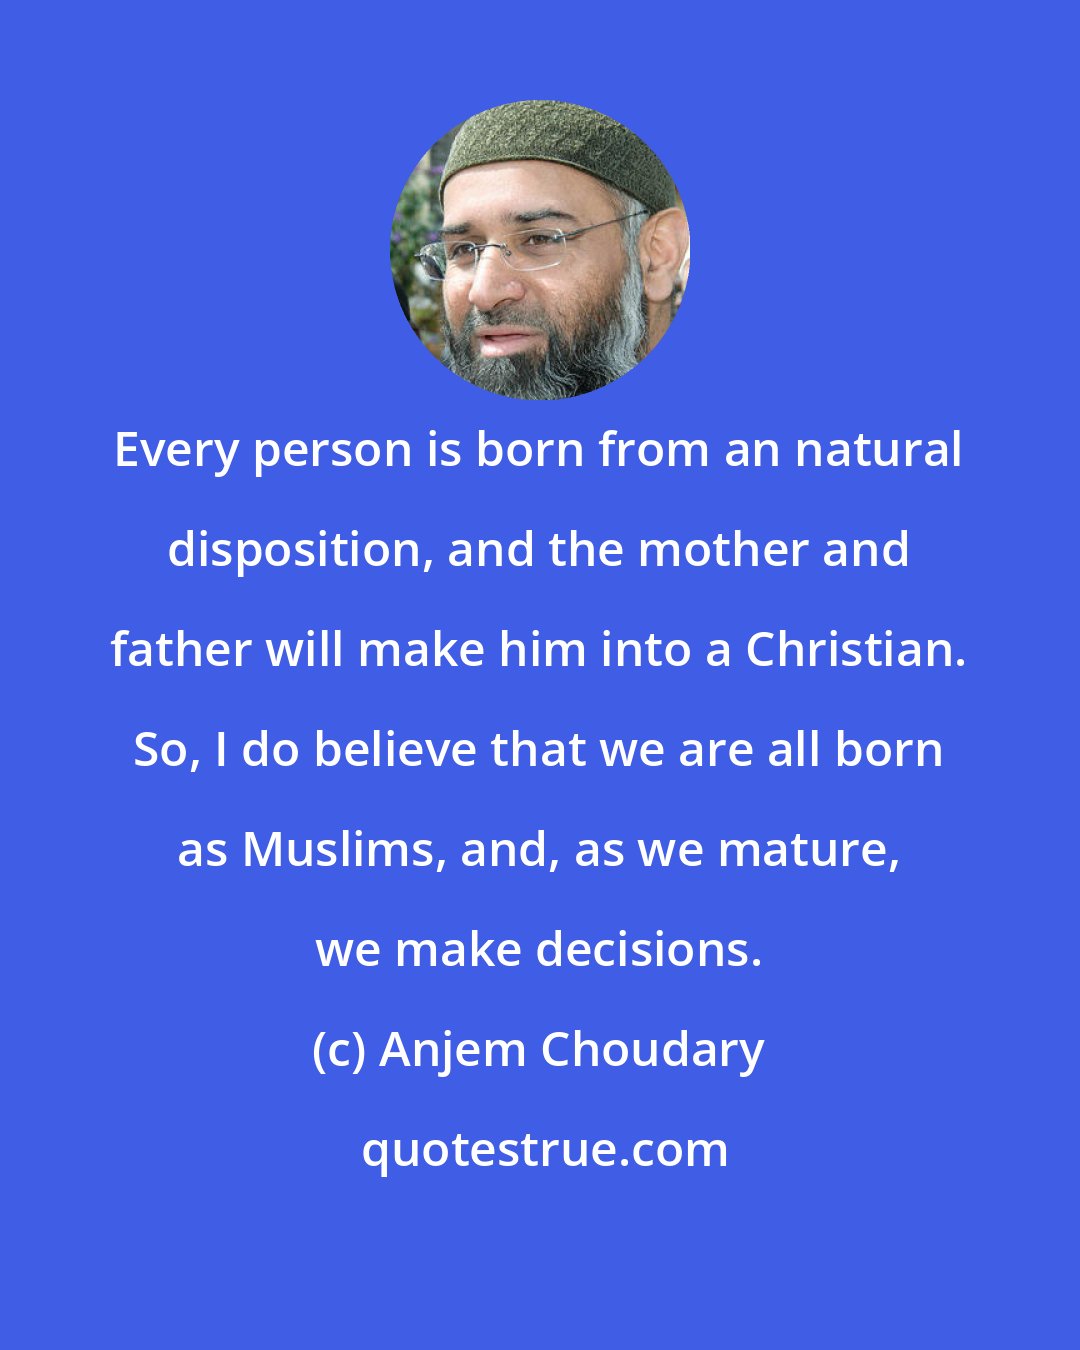 Anjem Choudary: Every person is born from an natural disposition, and the mother and father will make him into a Christian. So, I do believe that we are all born as Muslims, and, as we mature, we make decisions.